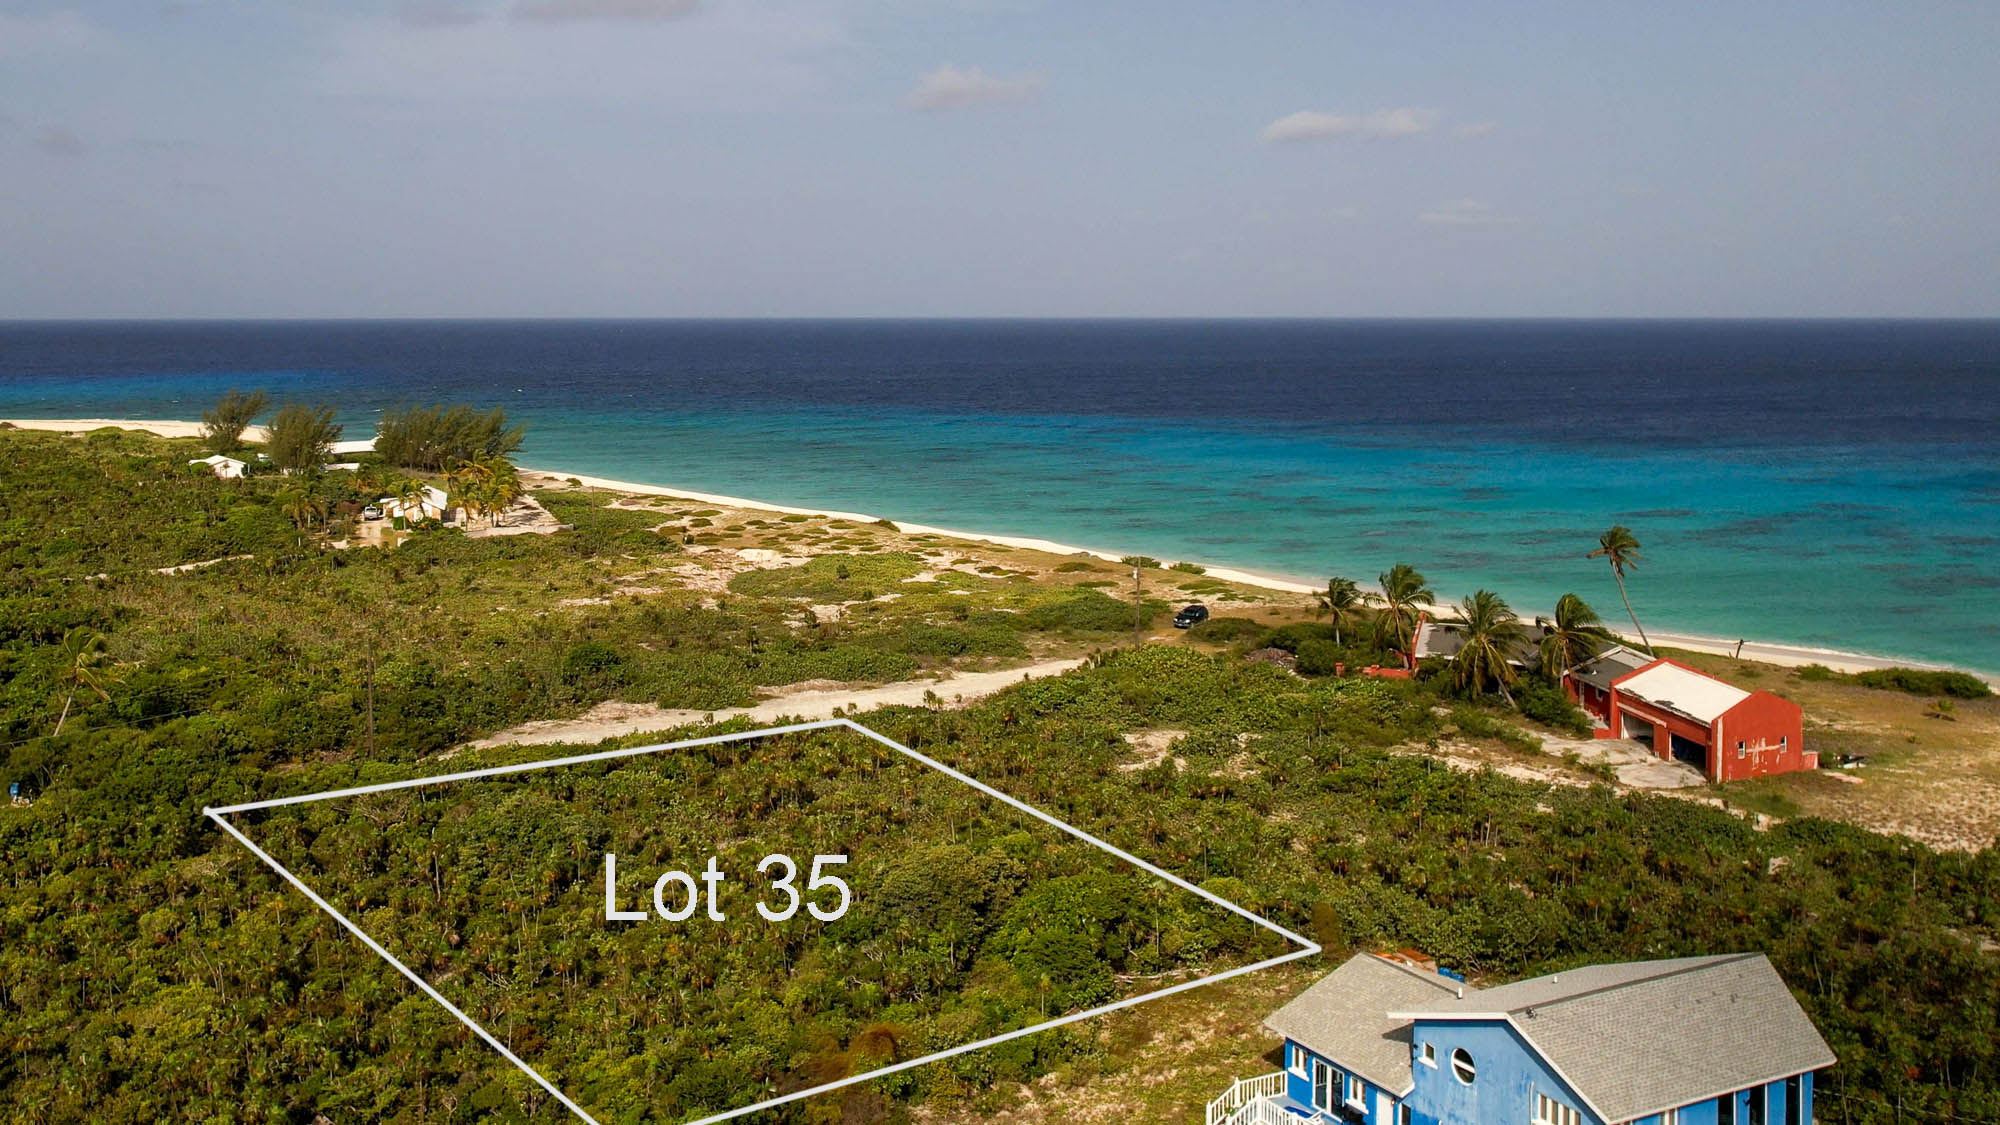 Vacant half acre lot 2 lots from stunning beach in Sandy Point, San Salvador, The Bahamas